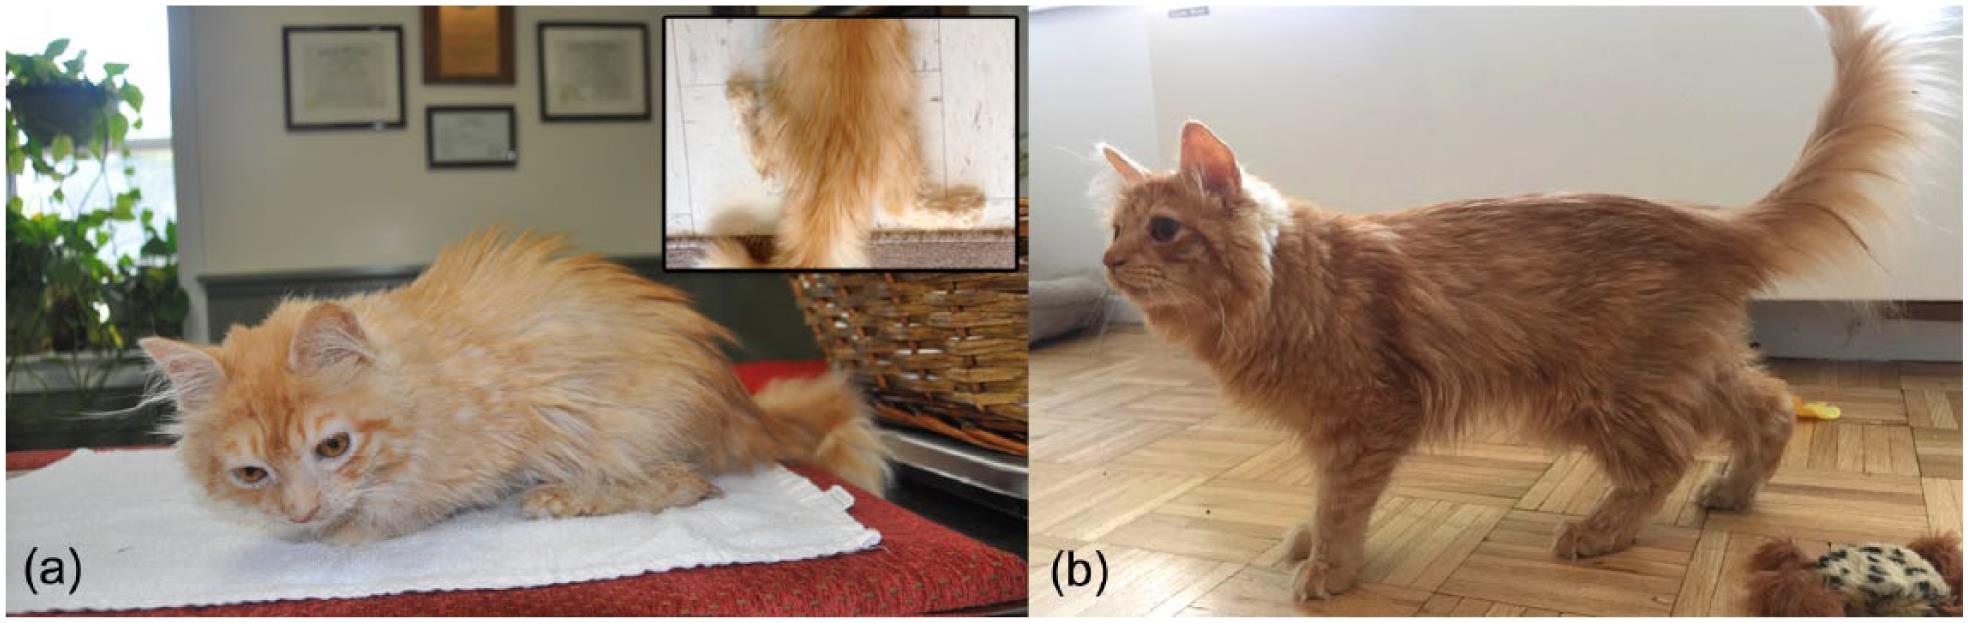 Primary goitrous hypothyroidism in a young adult domestic longhair cat